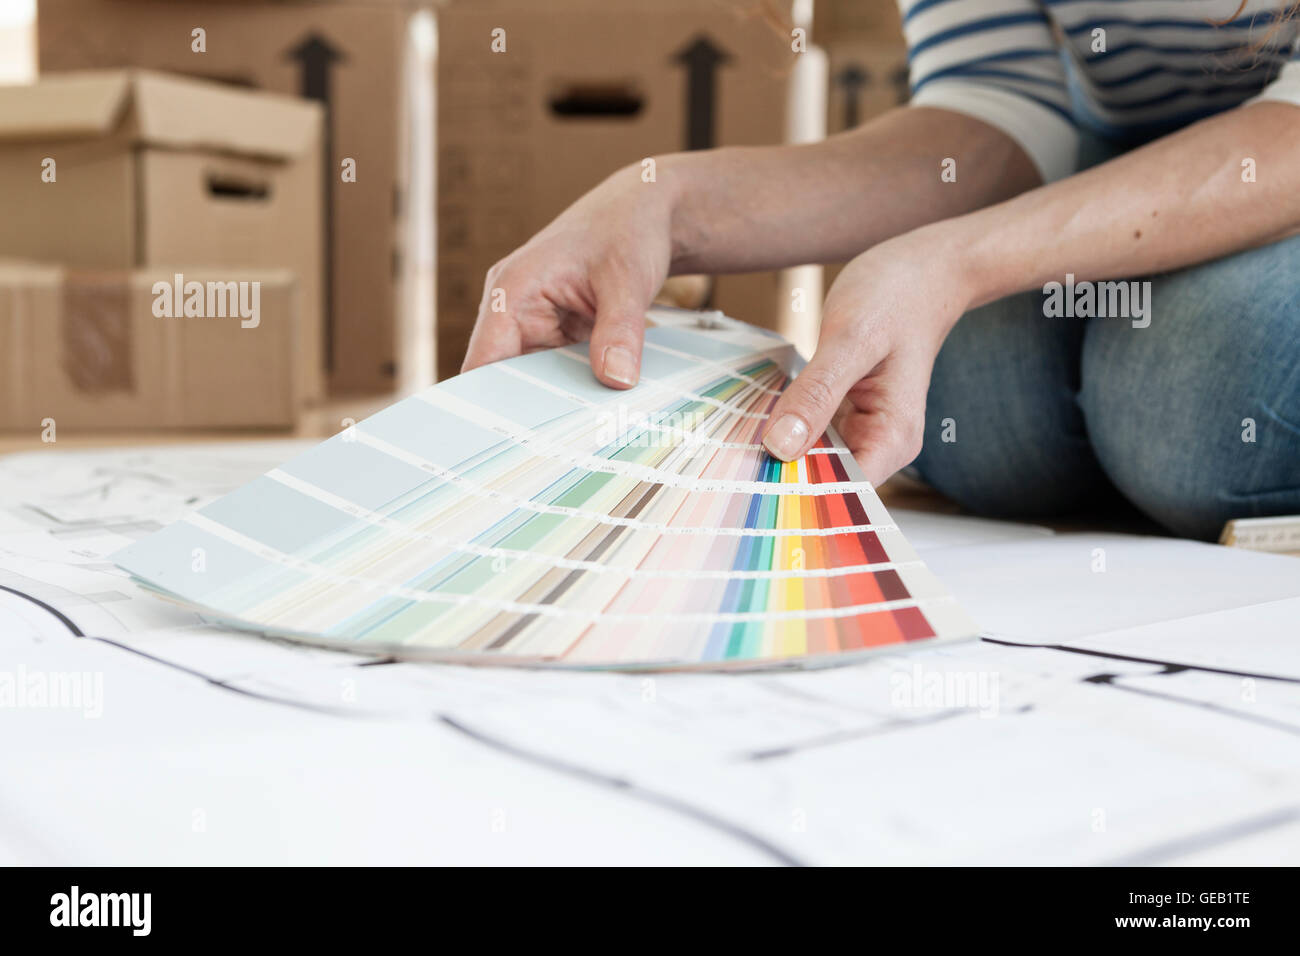 Woman with color samples on floor Stock Photo